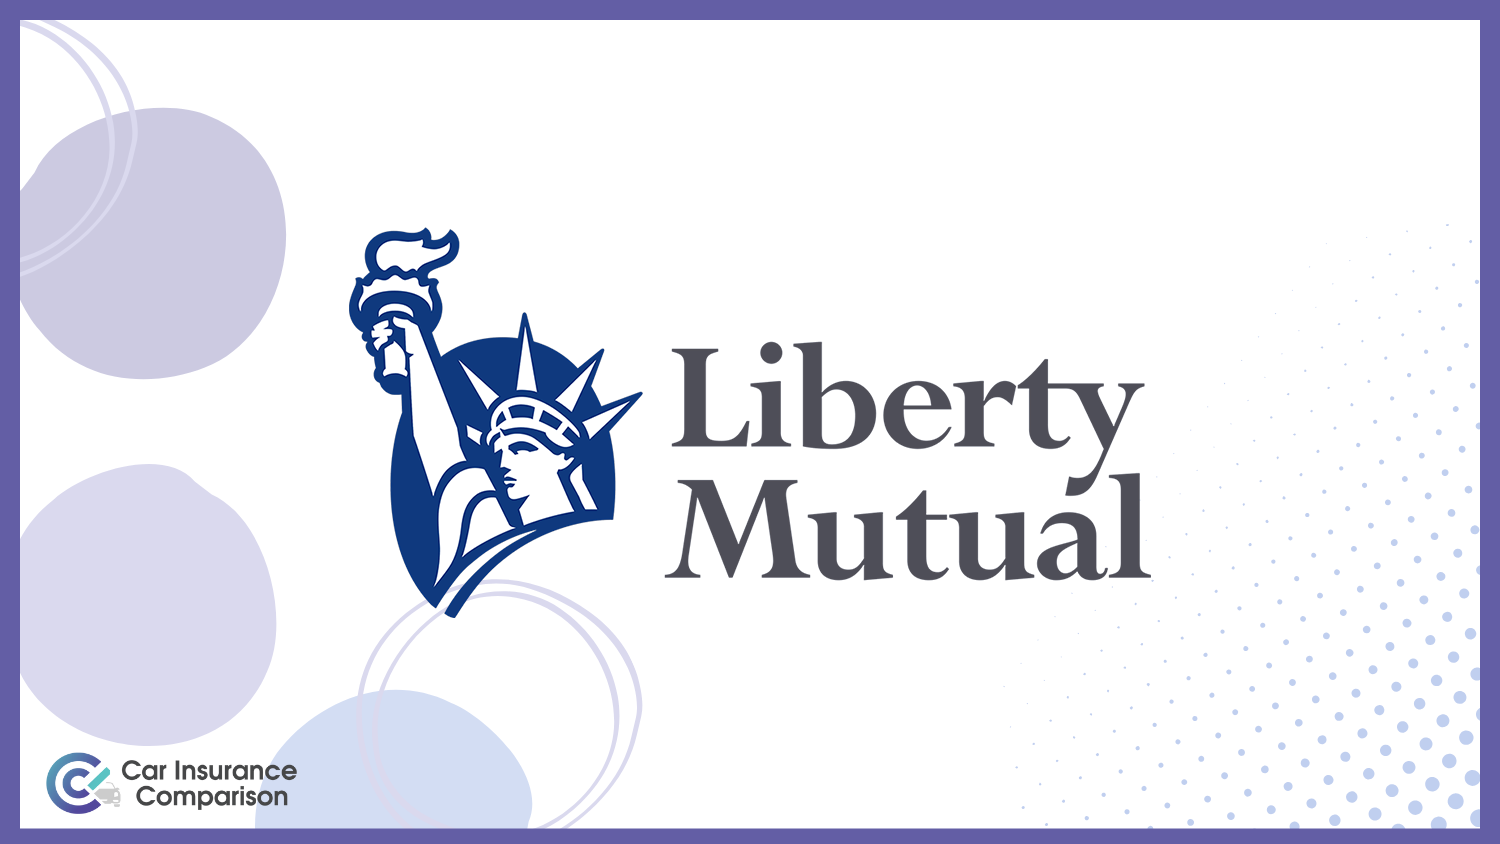 Liberty Mutual: Best Car Insurance for Parents